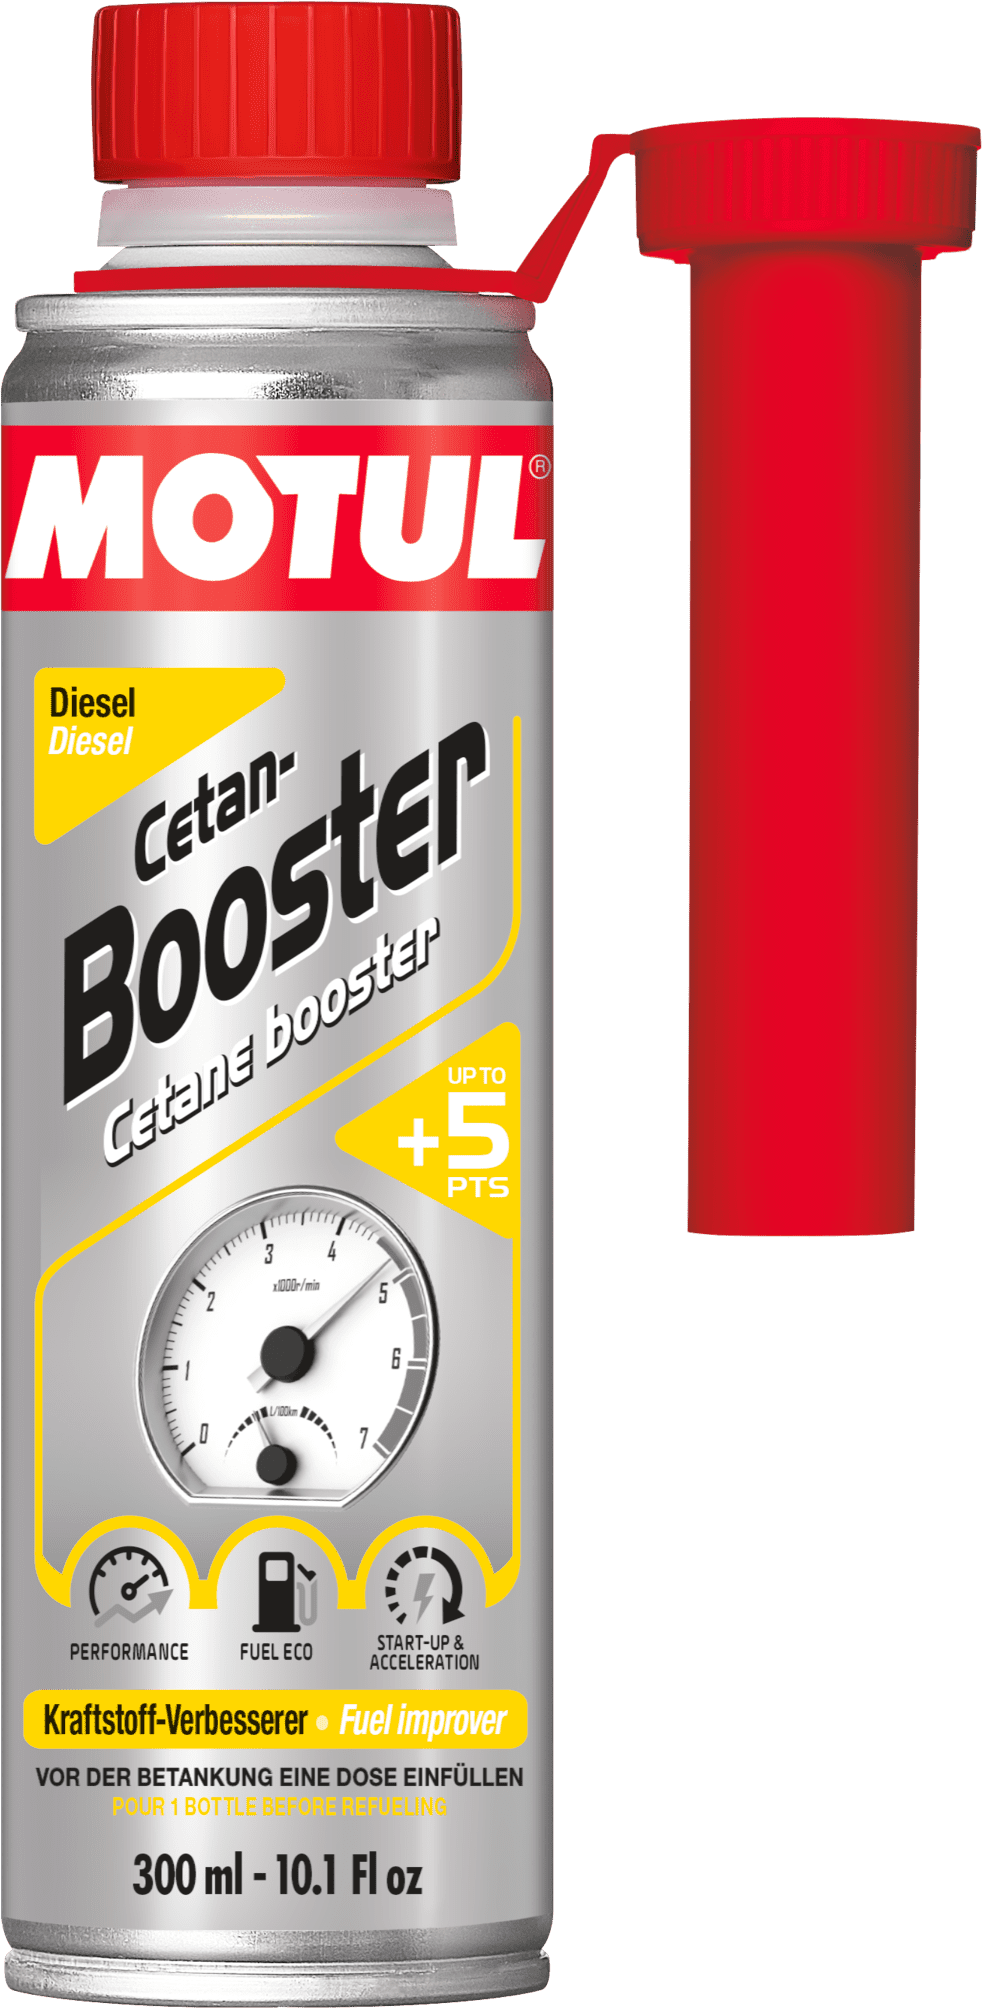 110677-300ML MOTUL Cetane Booster Diesel is a cetane index booster for Diesel fuels used in all types of Diesel engines, either indirect or direct, turbocharged or naturally aspirated, with or without DPF (Diesel Particulate Filter), using all types of Diesel fuels and biodiesels.